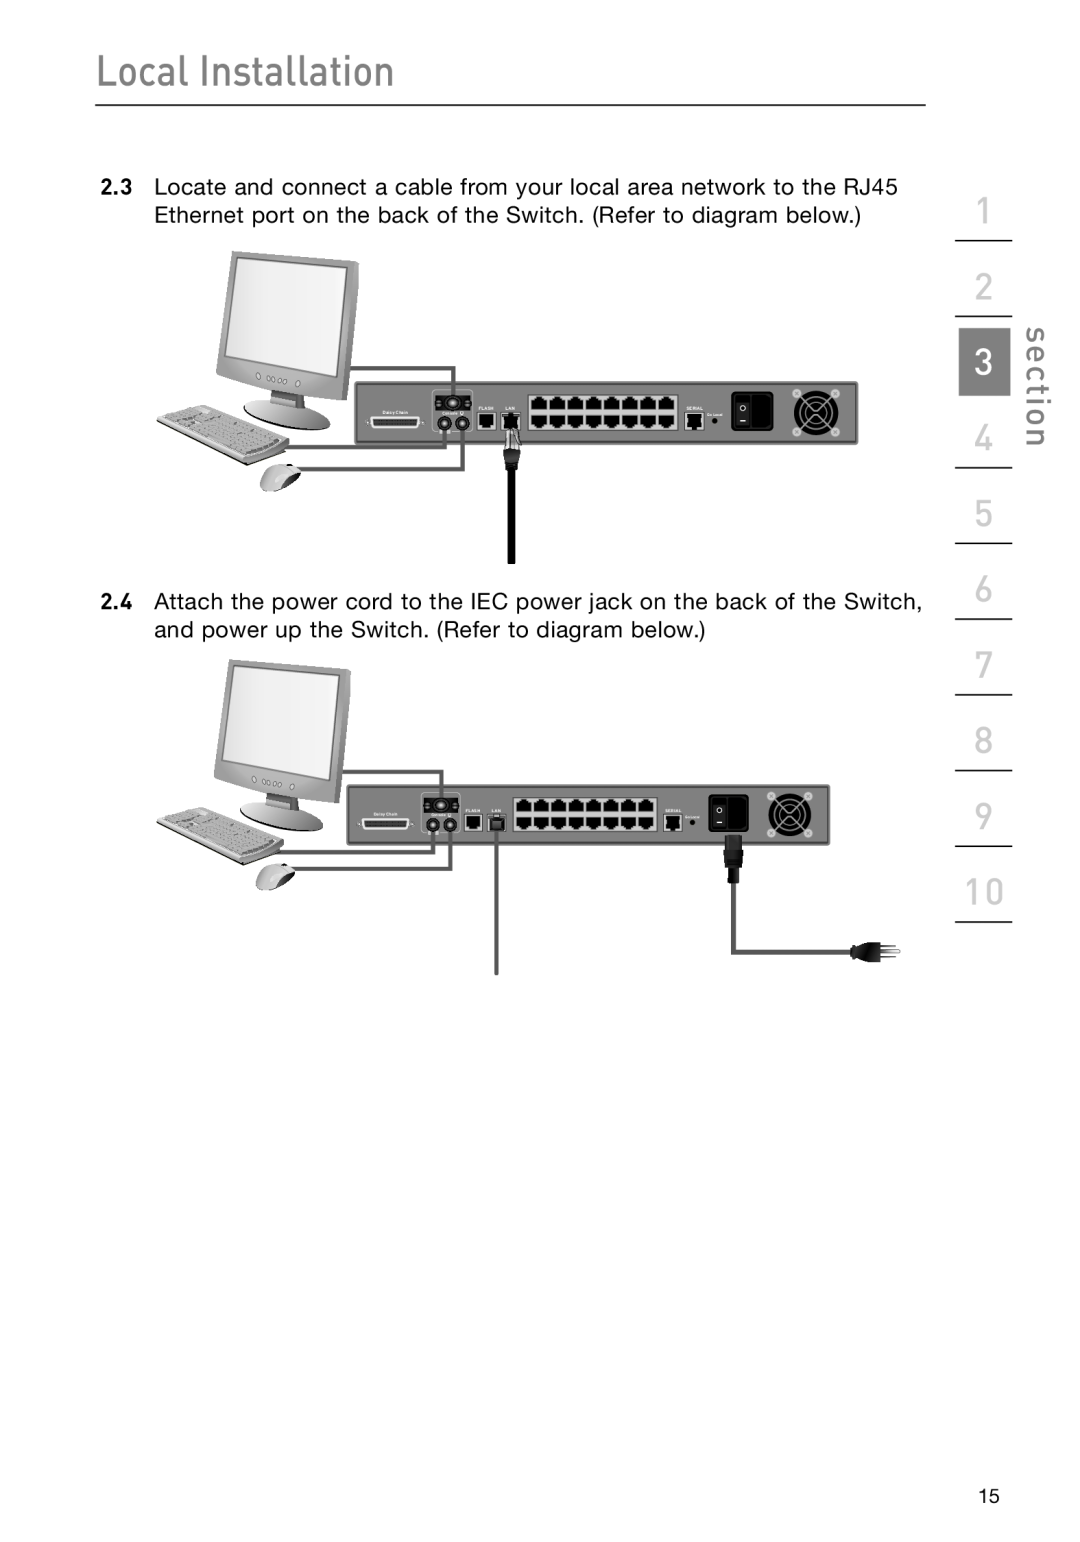 Belkin F1DP108G user manual Local Installation, section 